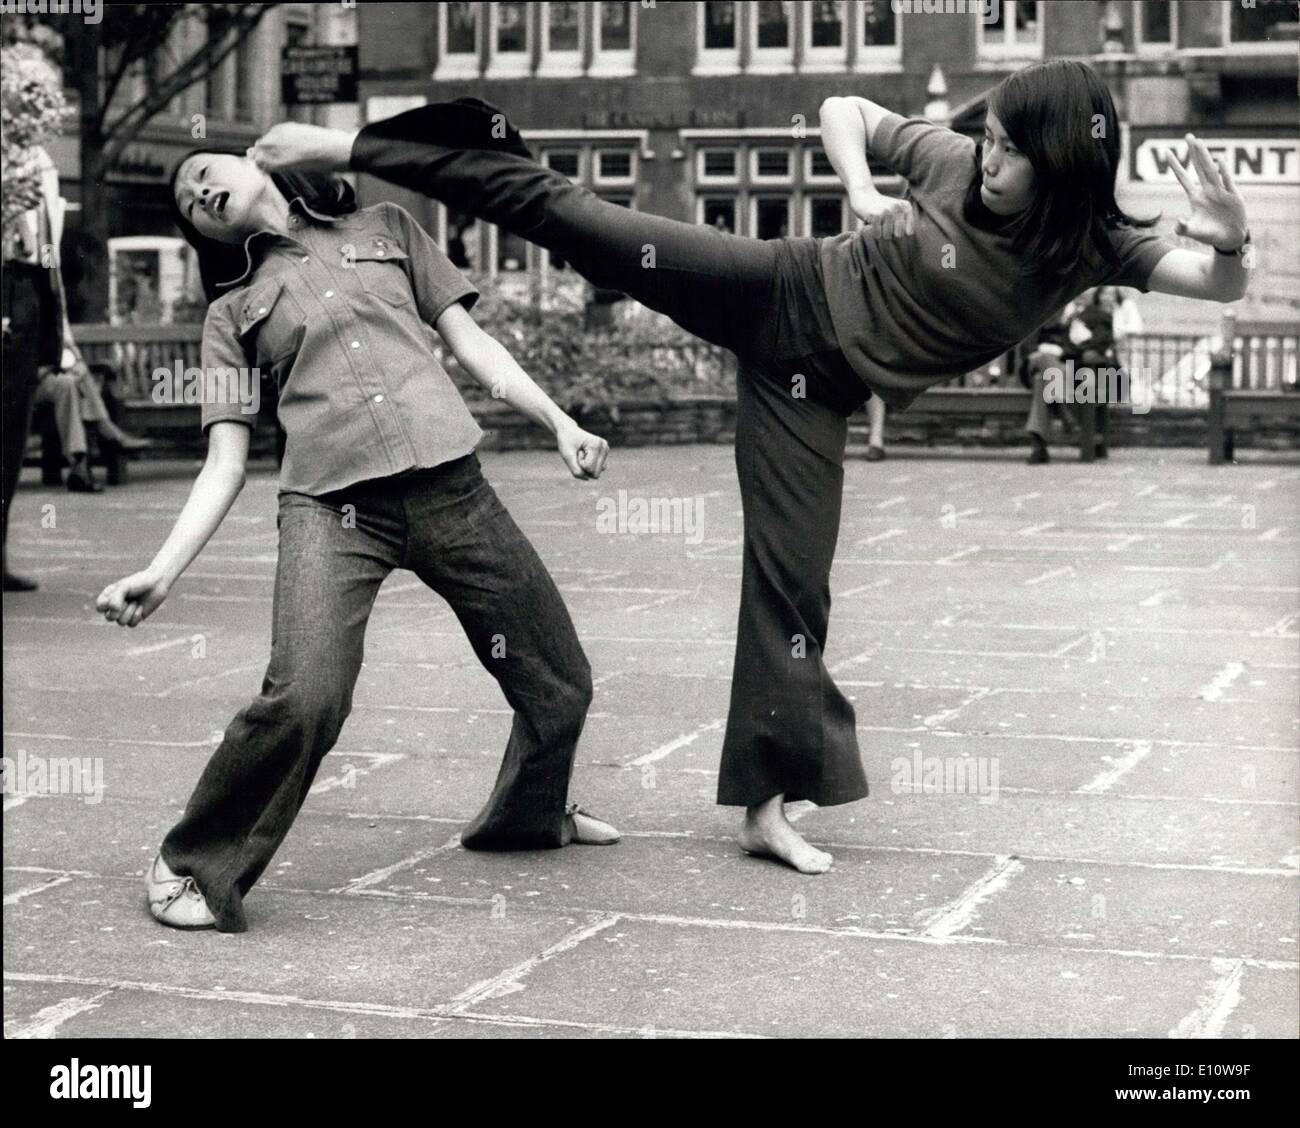 Jun. 07, 1974 - Kung Fu Comes To Britain: The martial art of Kung Fu has come to Britain, with the arrival of the entire Kung Fu company from Hong Kong, for their first -ever British provincial theatre tour, which opens with 'The Kung Fu Show'' at the Empire pool, Wembley tomorrow (June 8), and features a team of twenty exerts, all of whom are Kung Fu title holders, most of whom have appeared as stand-ins and stunt men in such movies as ''Enter The Dragon'' and ''Way of the Dragon''. The company met the press in London today Stock Photo